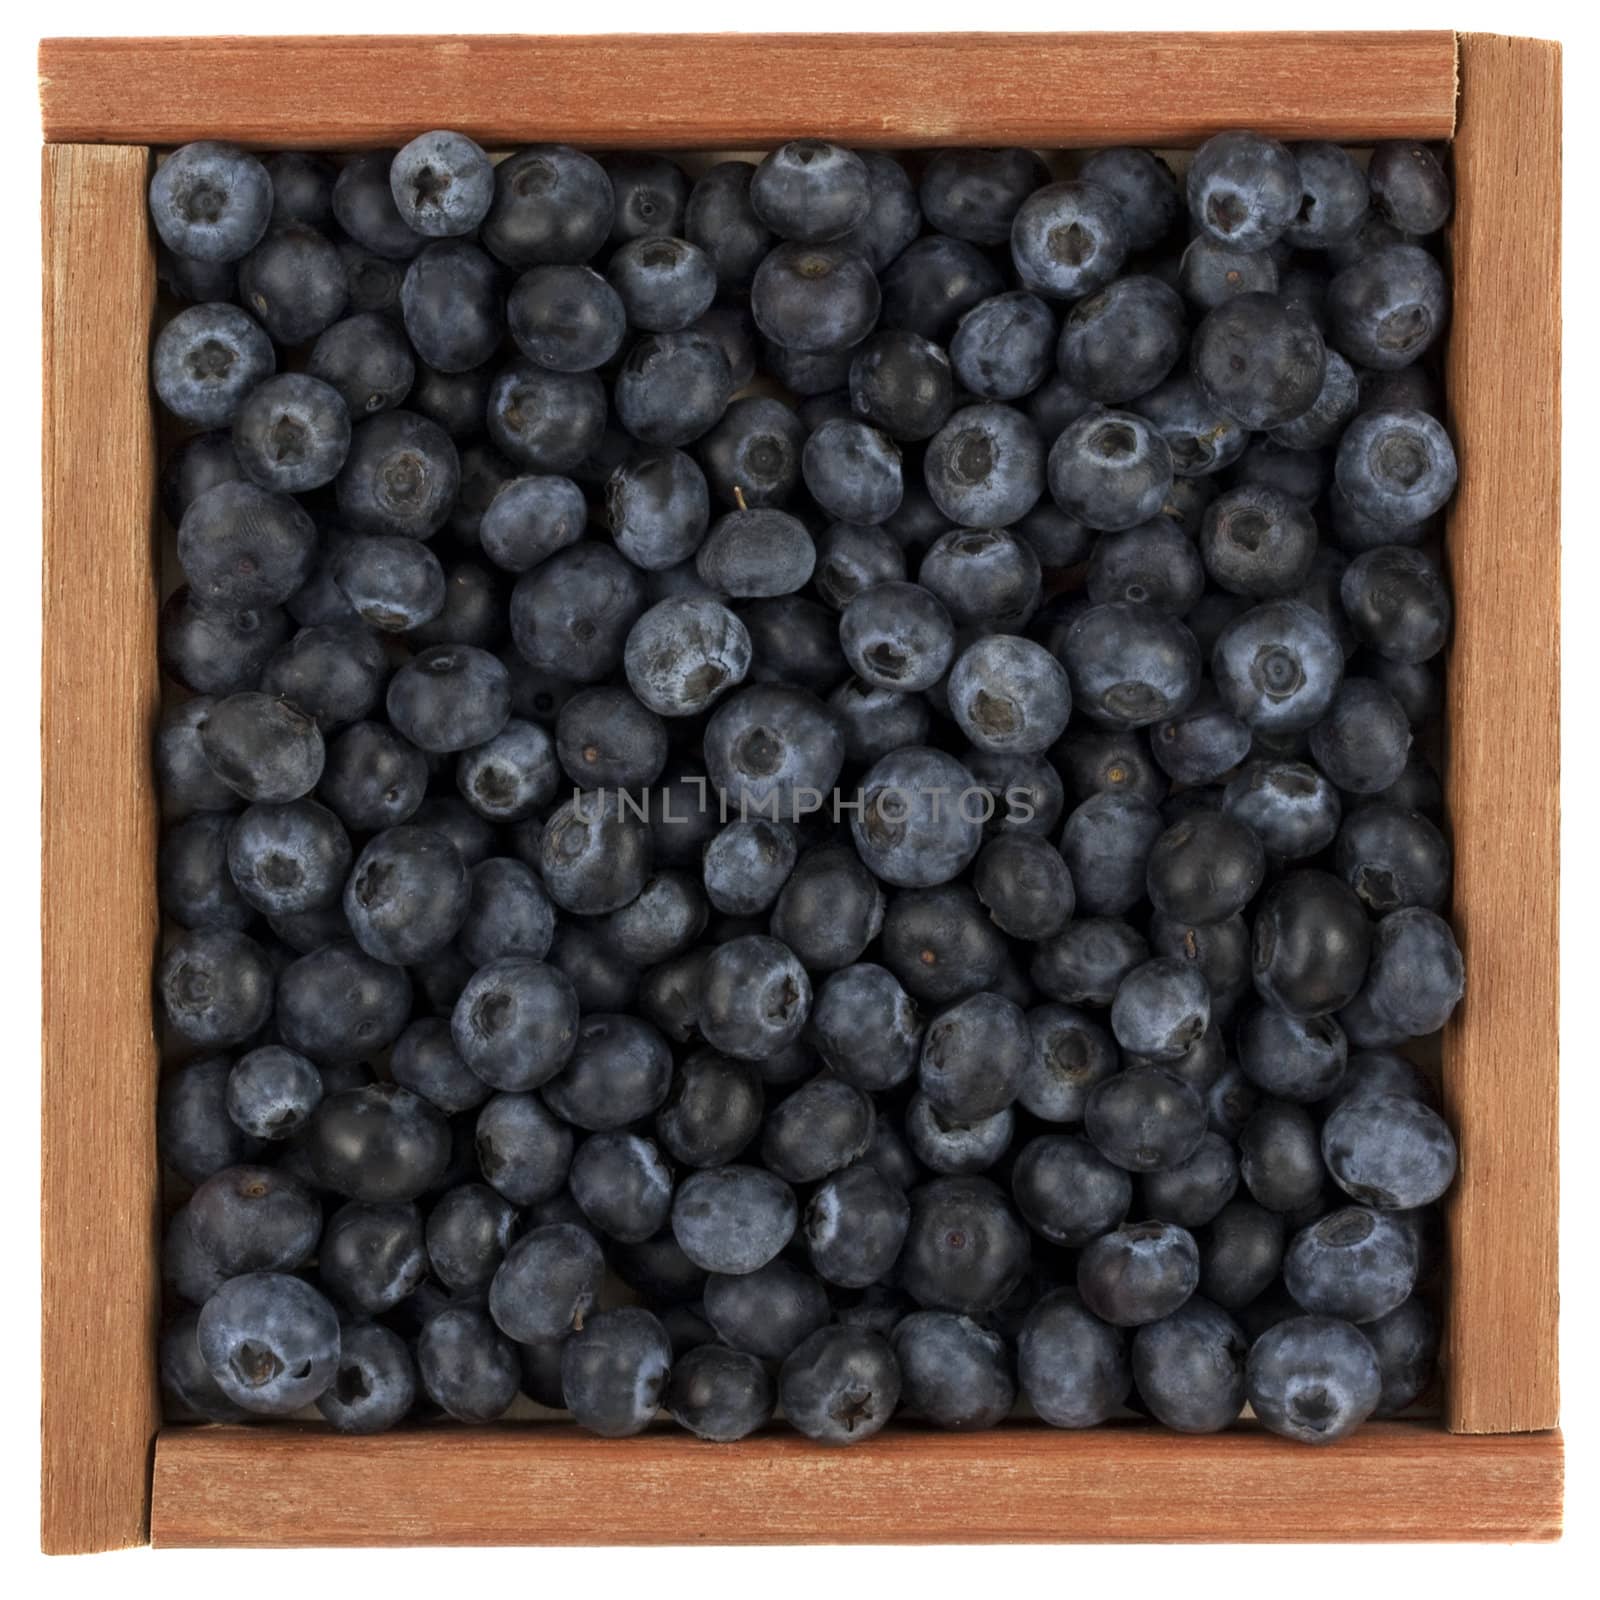 fresh blueberries in a rustic, wooden box or frame, isolated on white